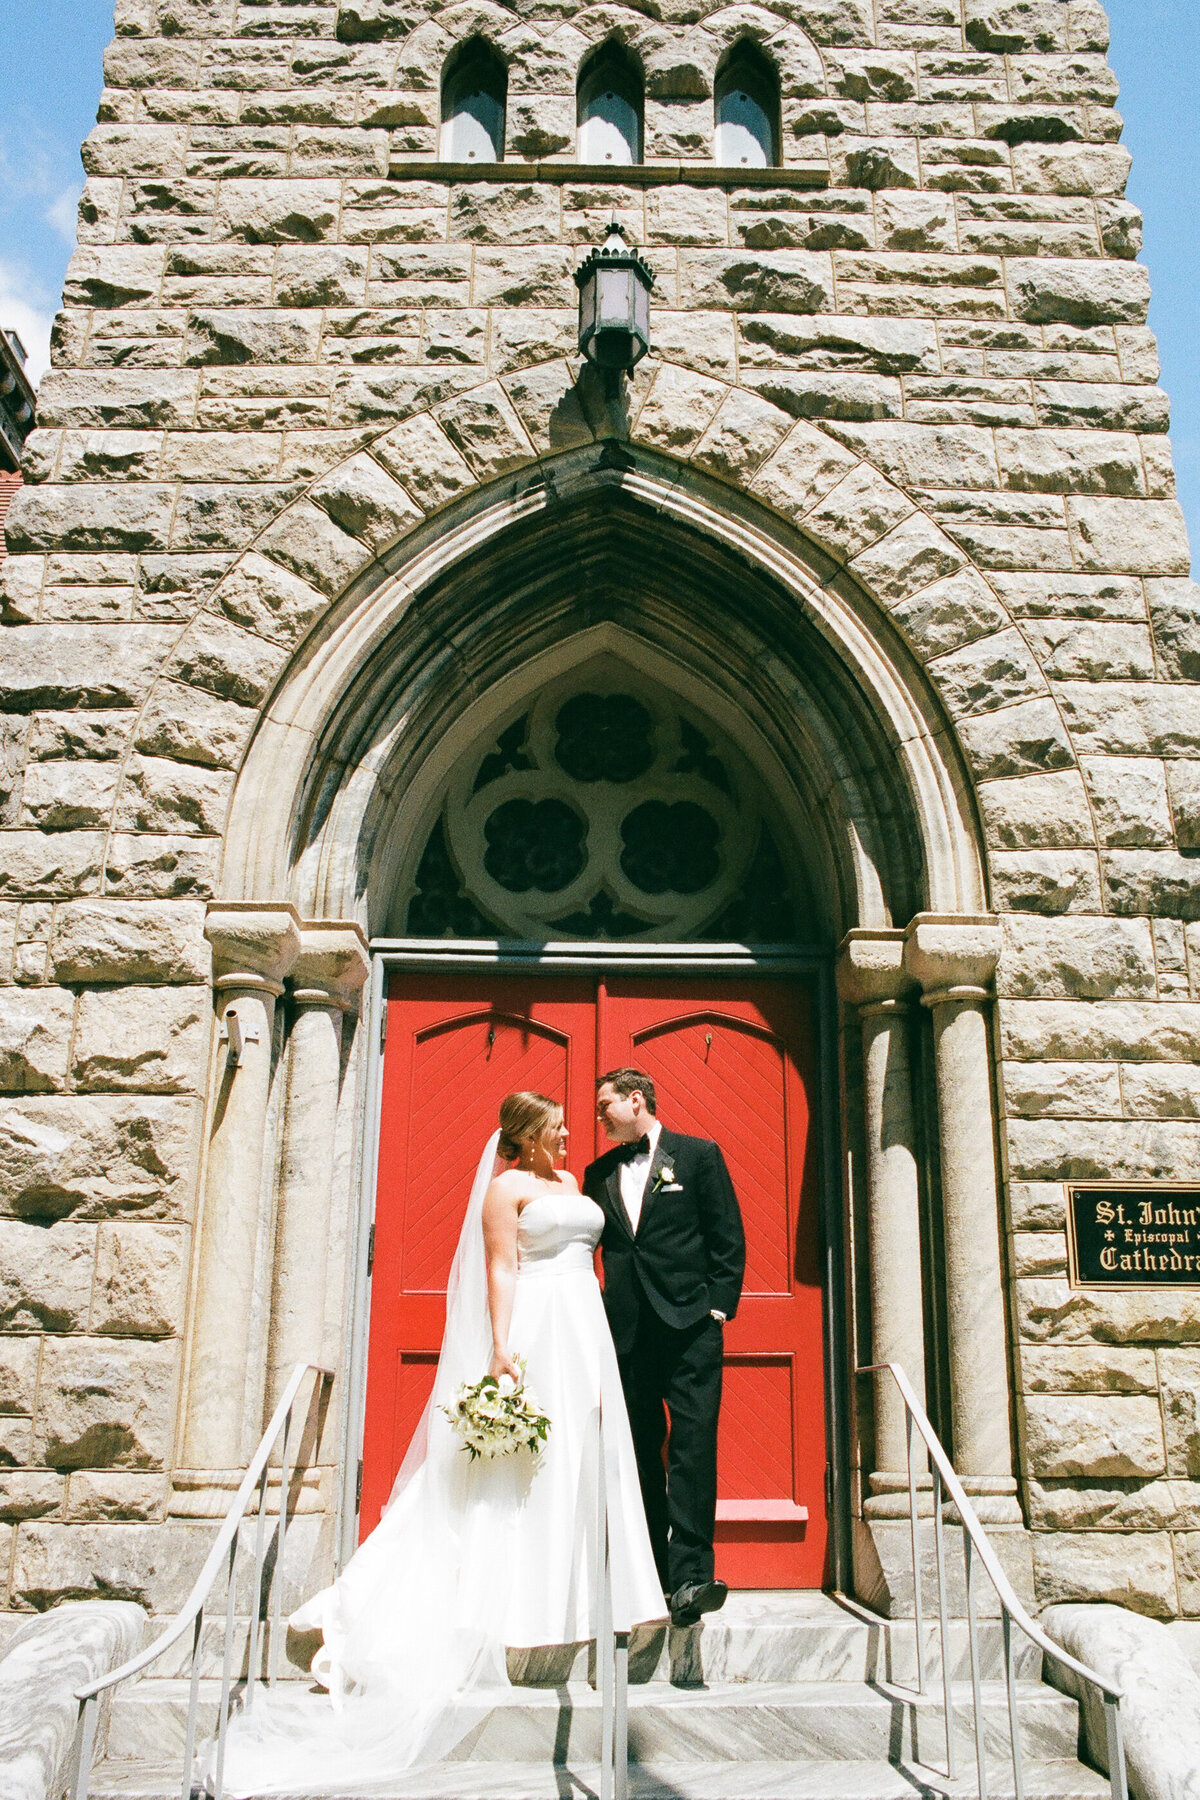 Paige and Tommy Wedding - Film - The Press Room and St. Johns Cathedral - East Tennessee and Destination Wedding Photographer - Alaina René Photography-158